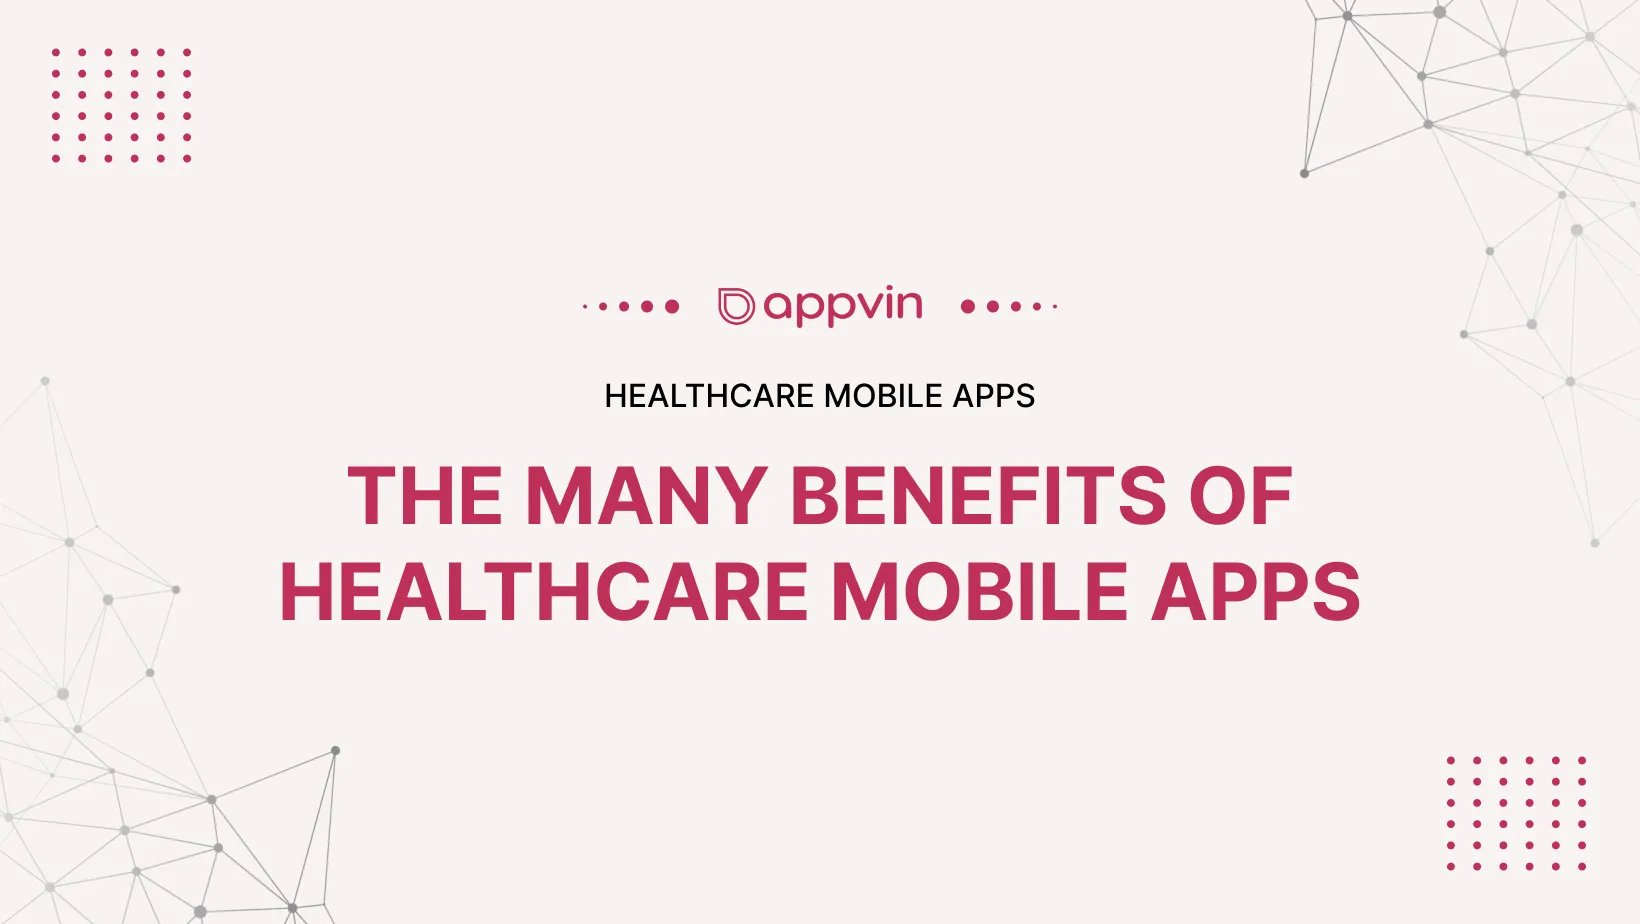 The Many Benefits of Healthcare Mobile Apps